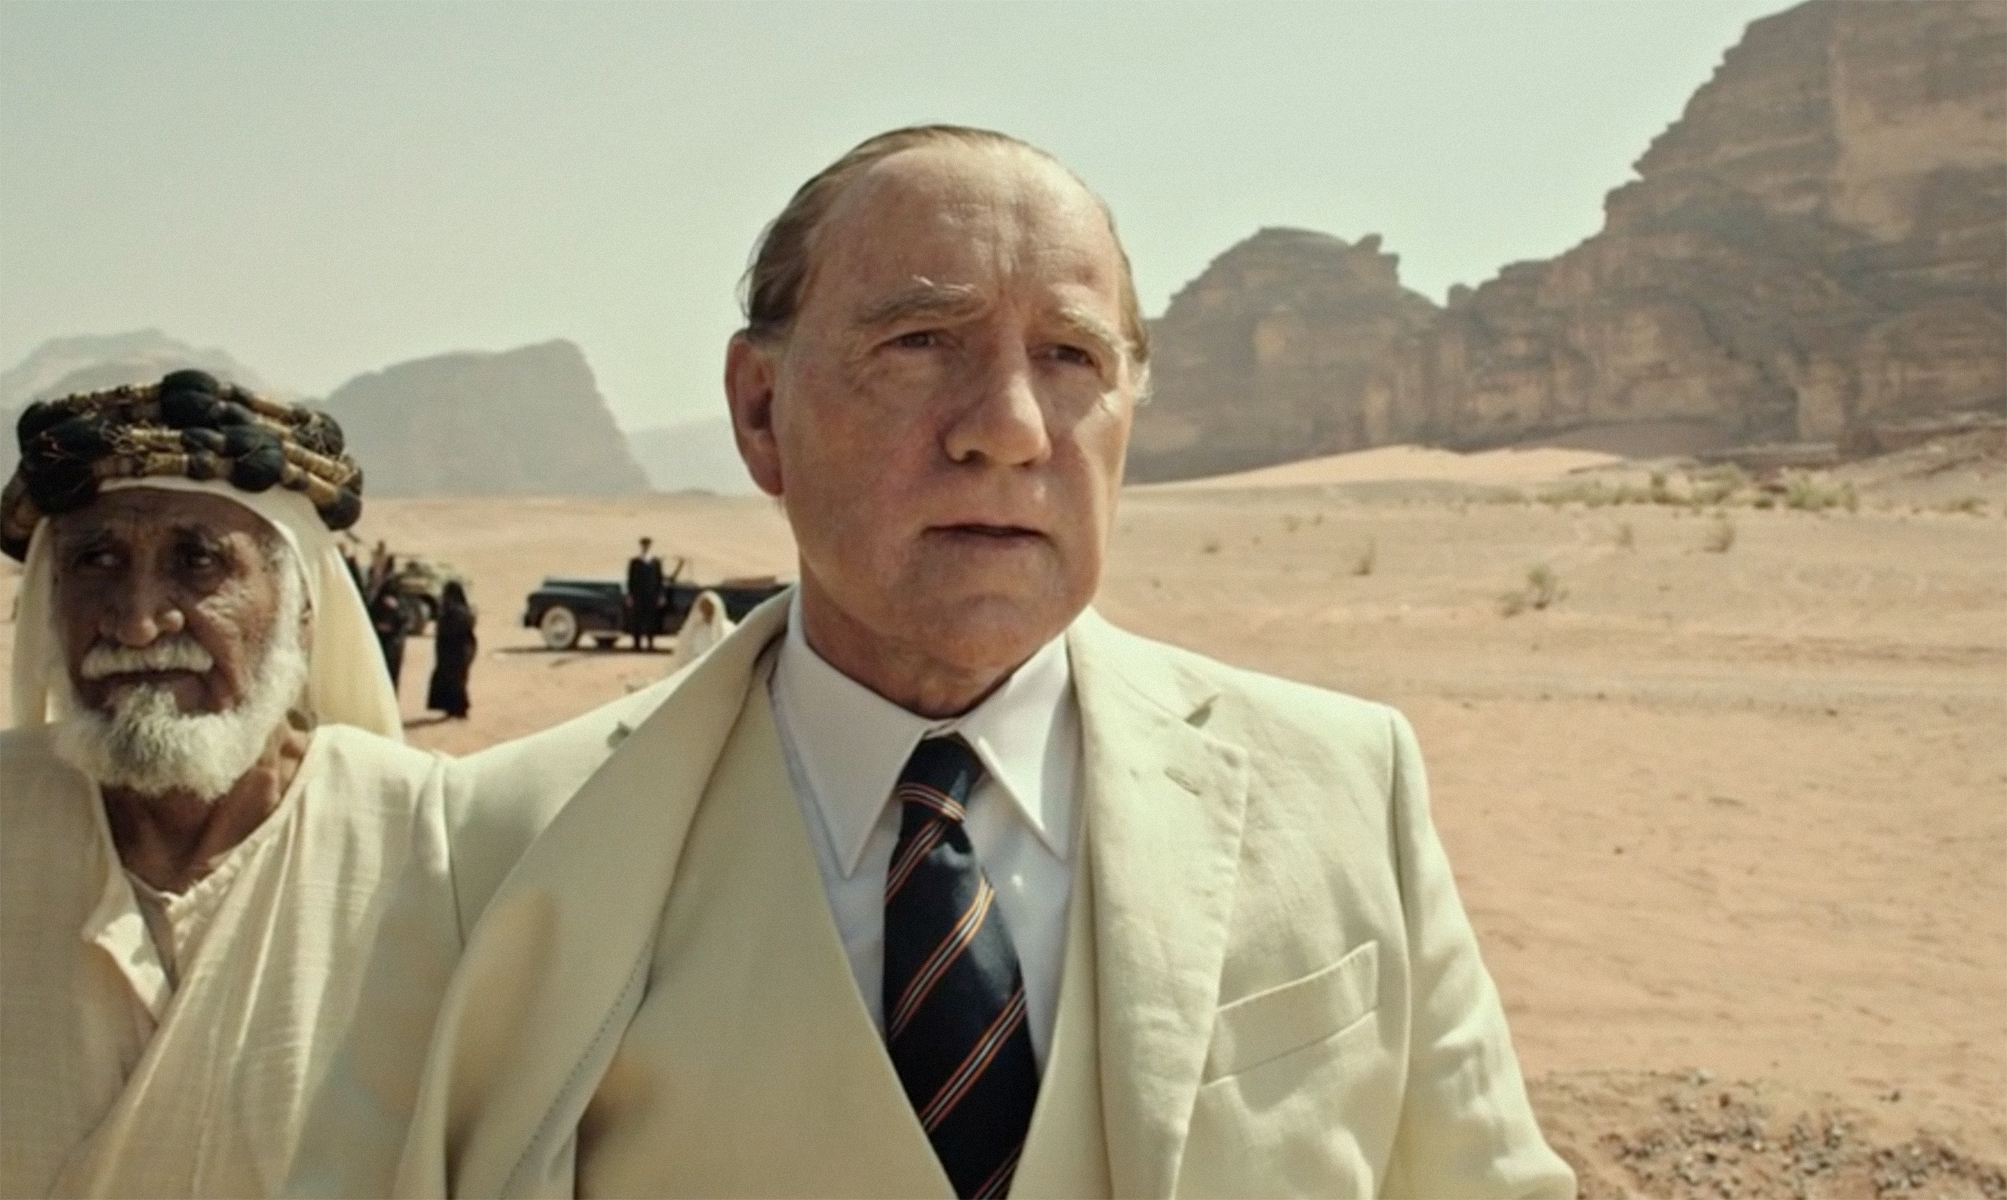 An elderly man in a beige suit and tie stands in a desert with rocky mountains in the background. Another man in traditional attire stands behind him